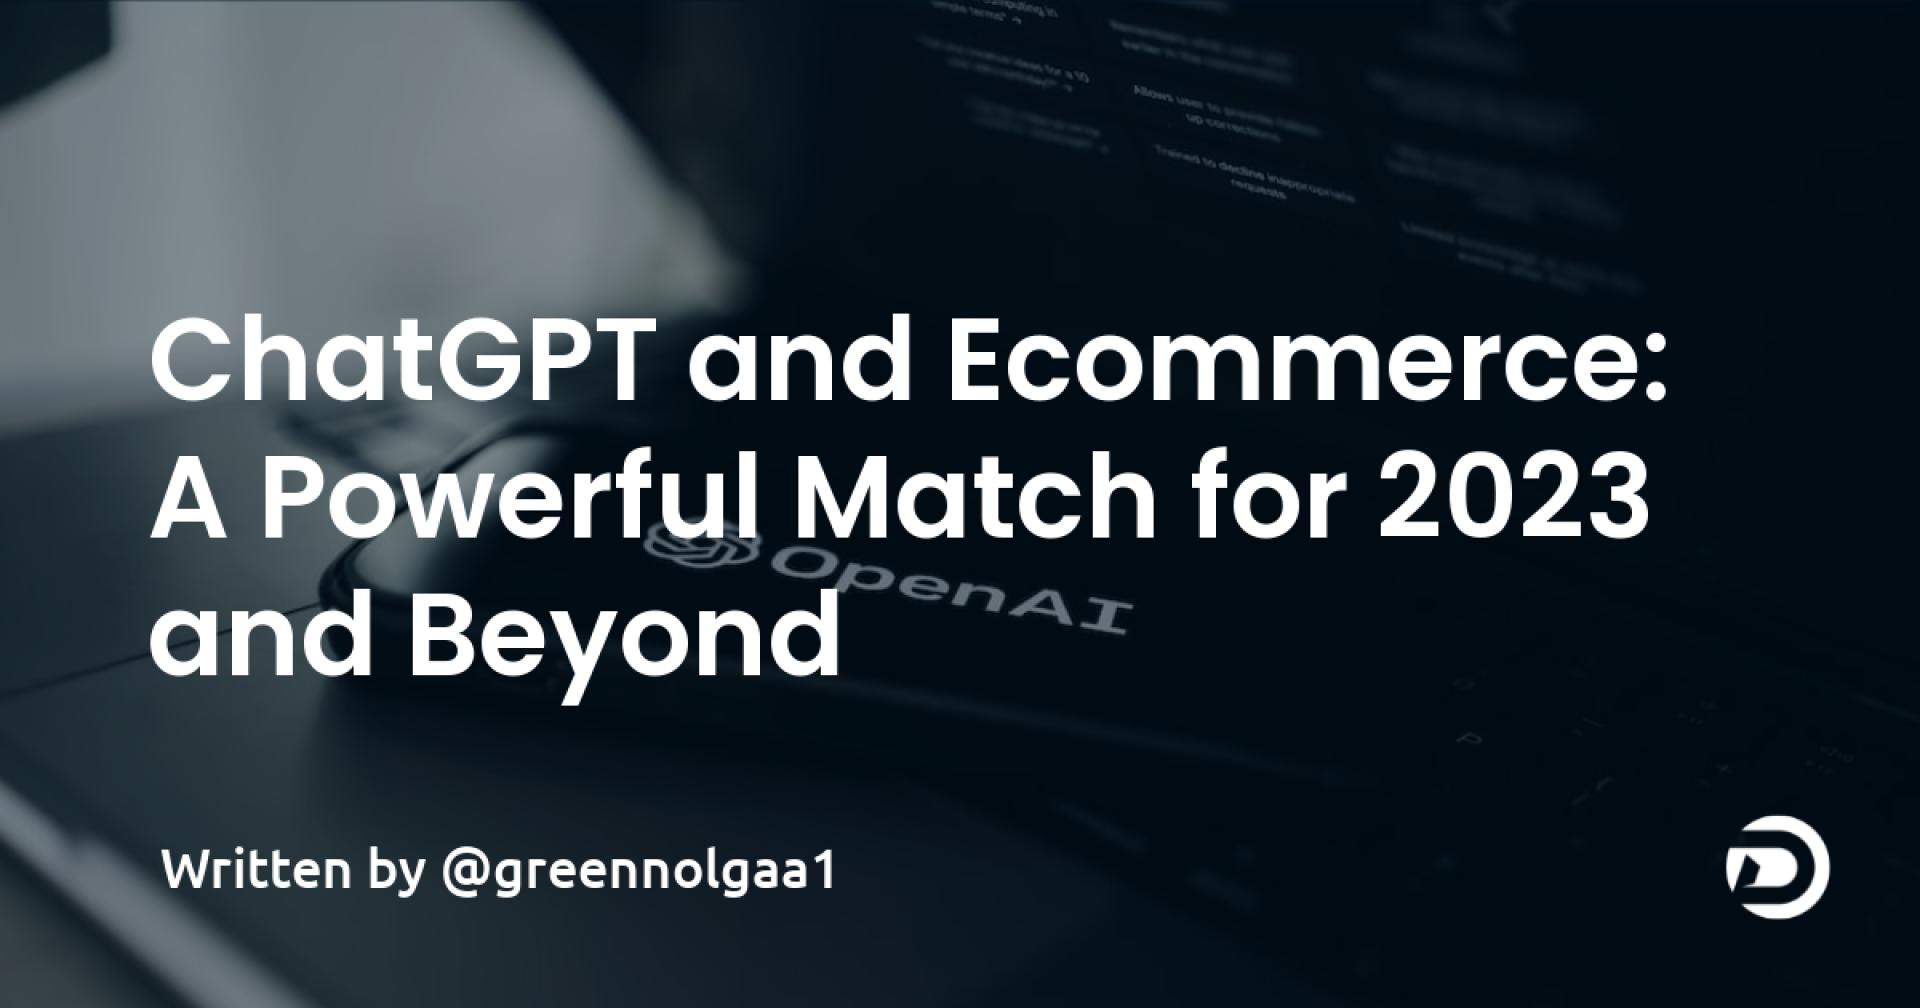 ChatGPT and Ecommerce: A Powerful Match for 2023 and Beyond